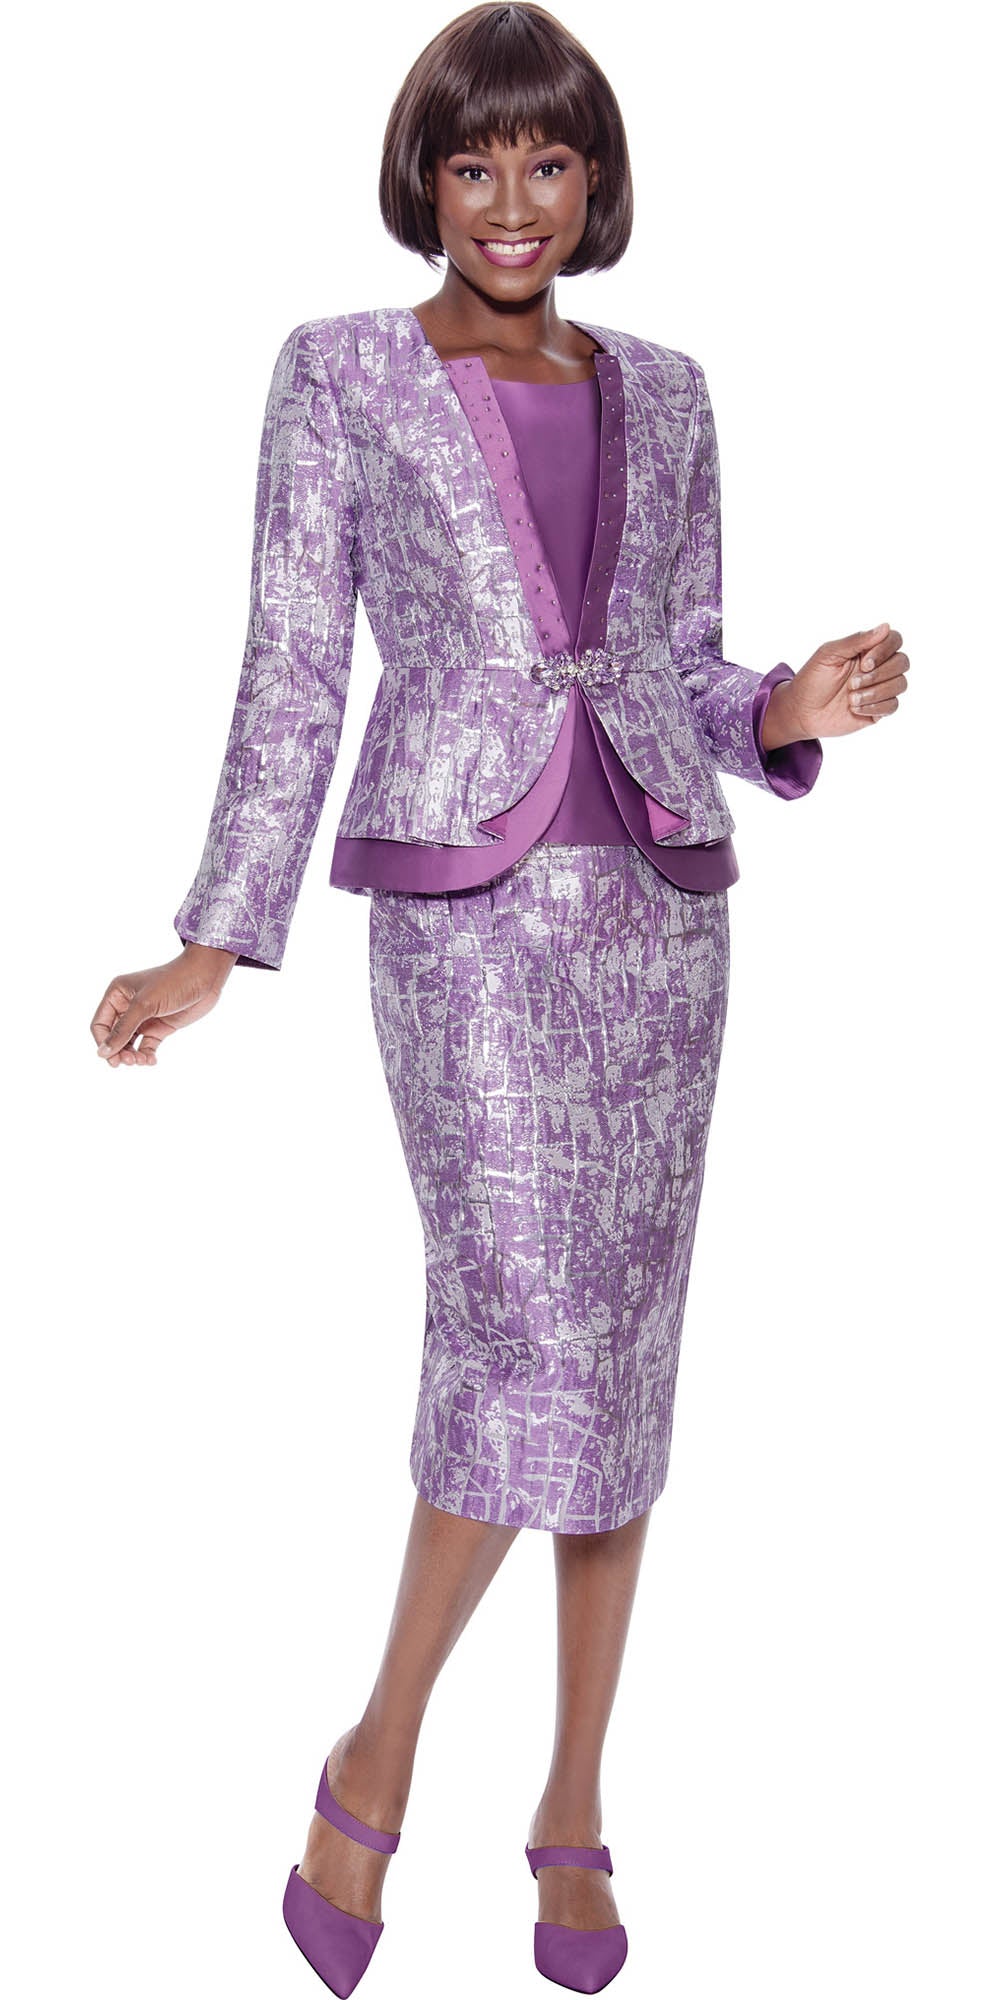 Terramina 7130 - Lavender - 3 PC Skirt Suit with Textured Fabric